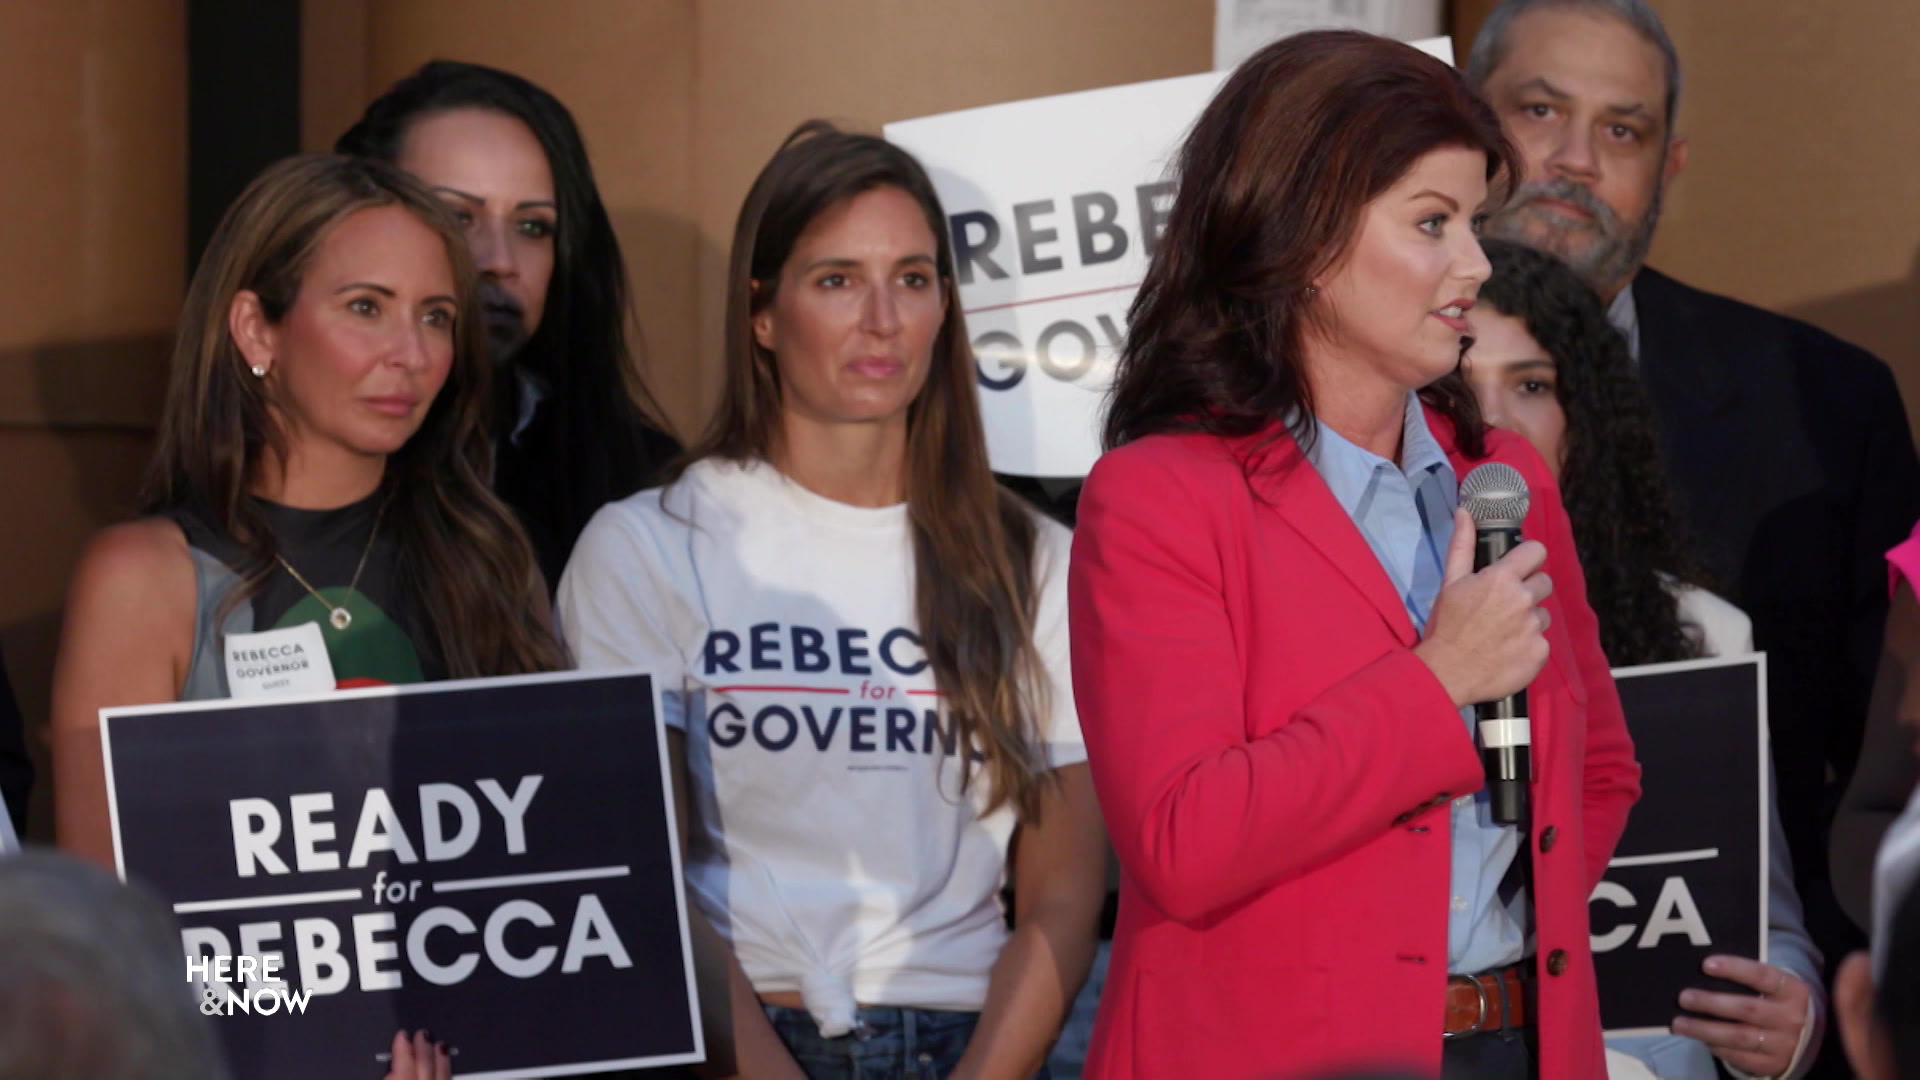 From left, Scarlett Johnson (holding a "Ready for Rebecca" sign) and Amber Schroeder (wearing a "Rebecca for Governor" shirt) stand behind Republican candidate for governor and former Lt. Gov. Rebecca Kleefisch at a political rally.